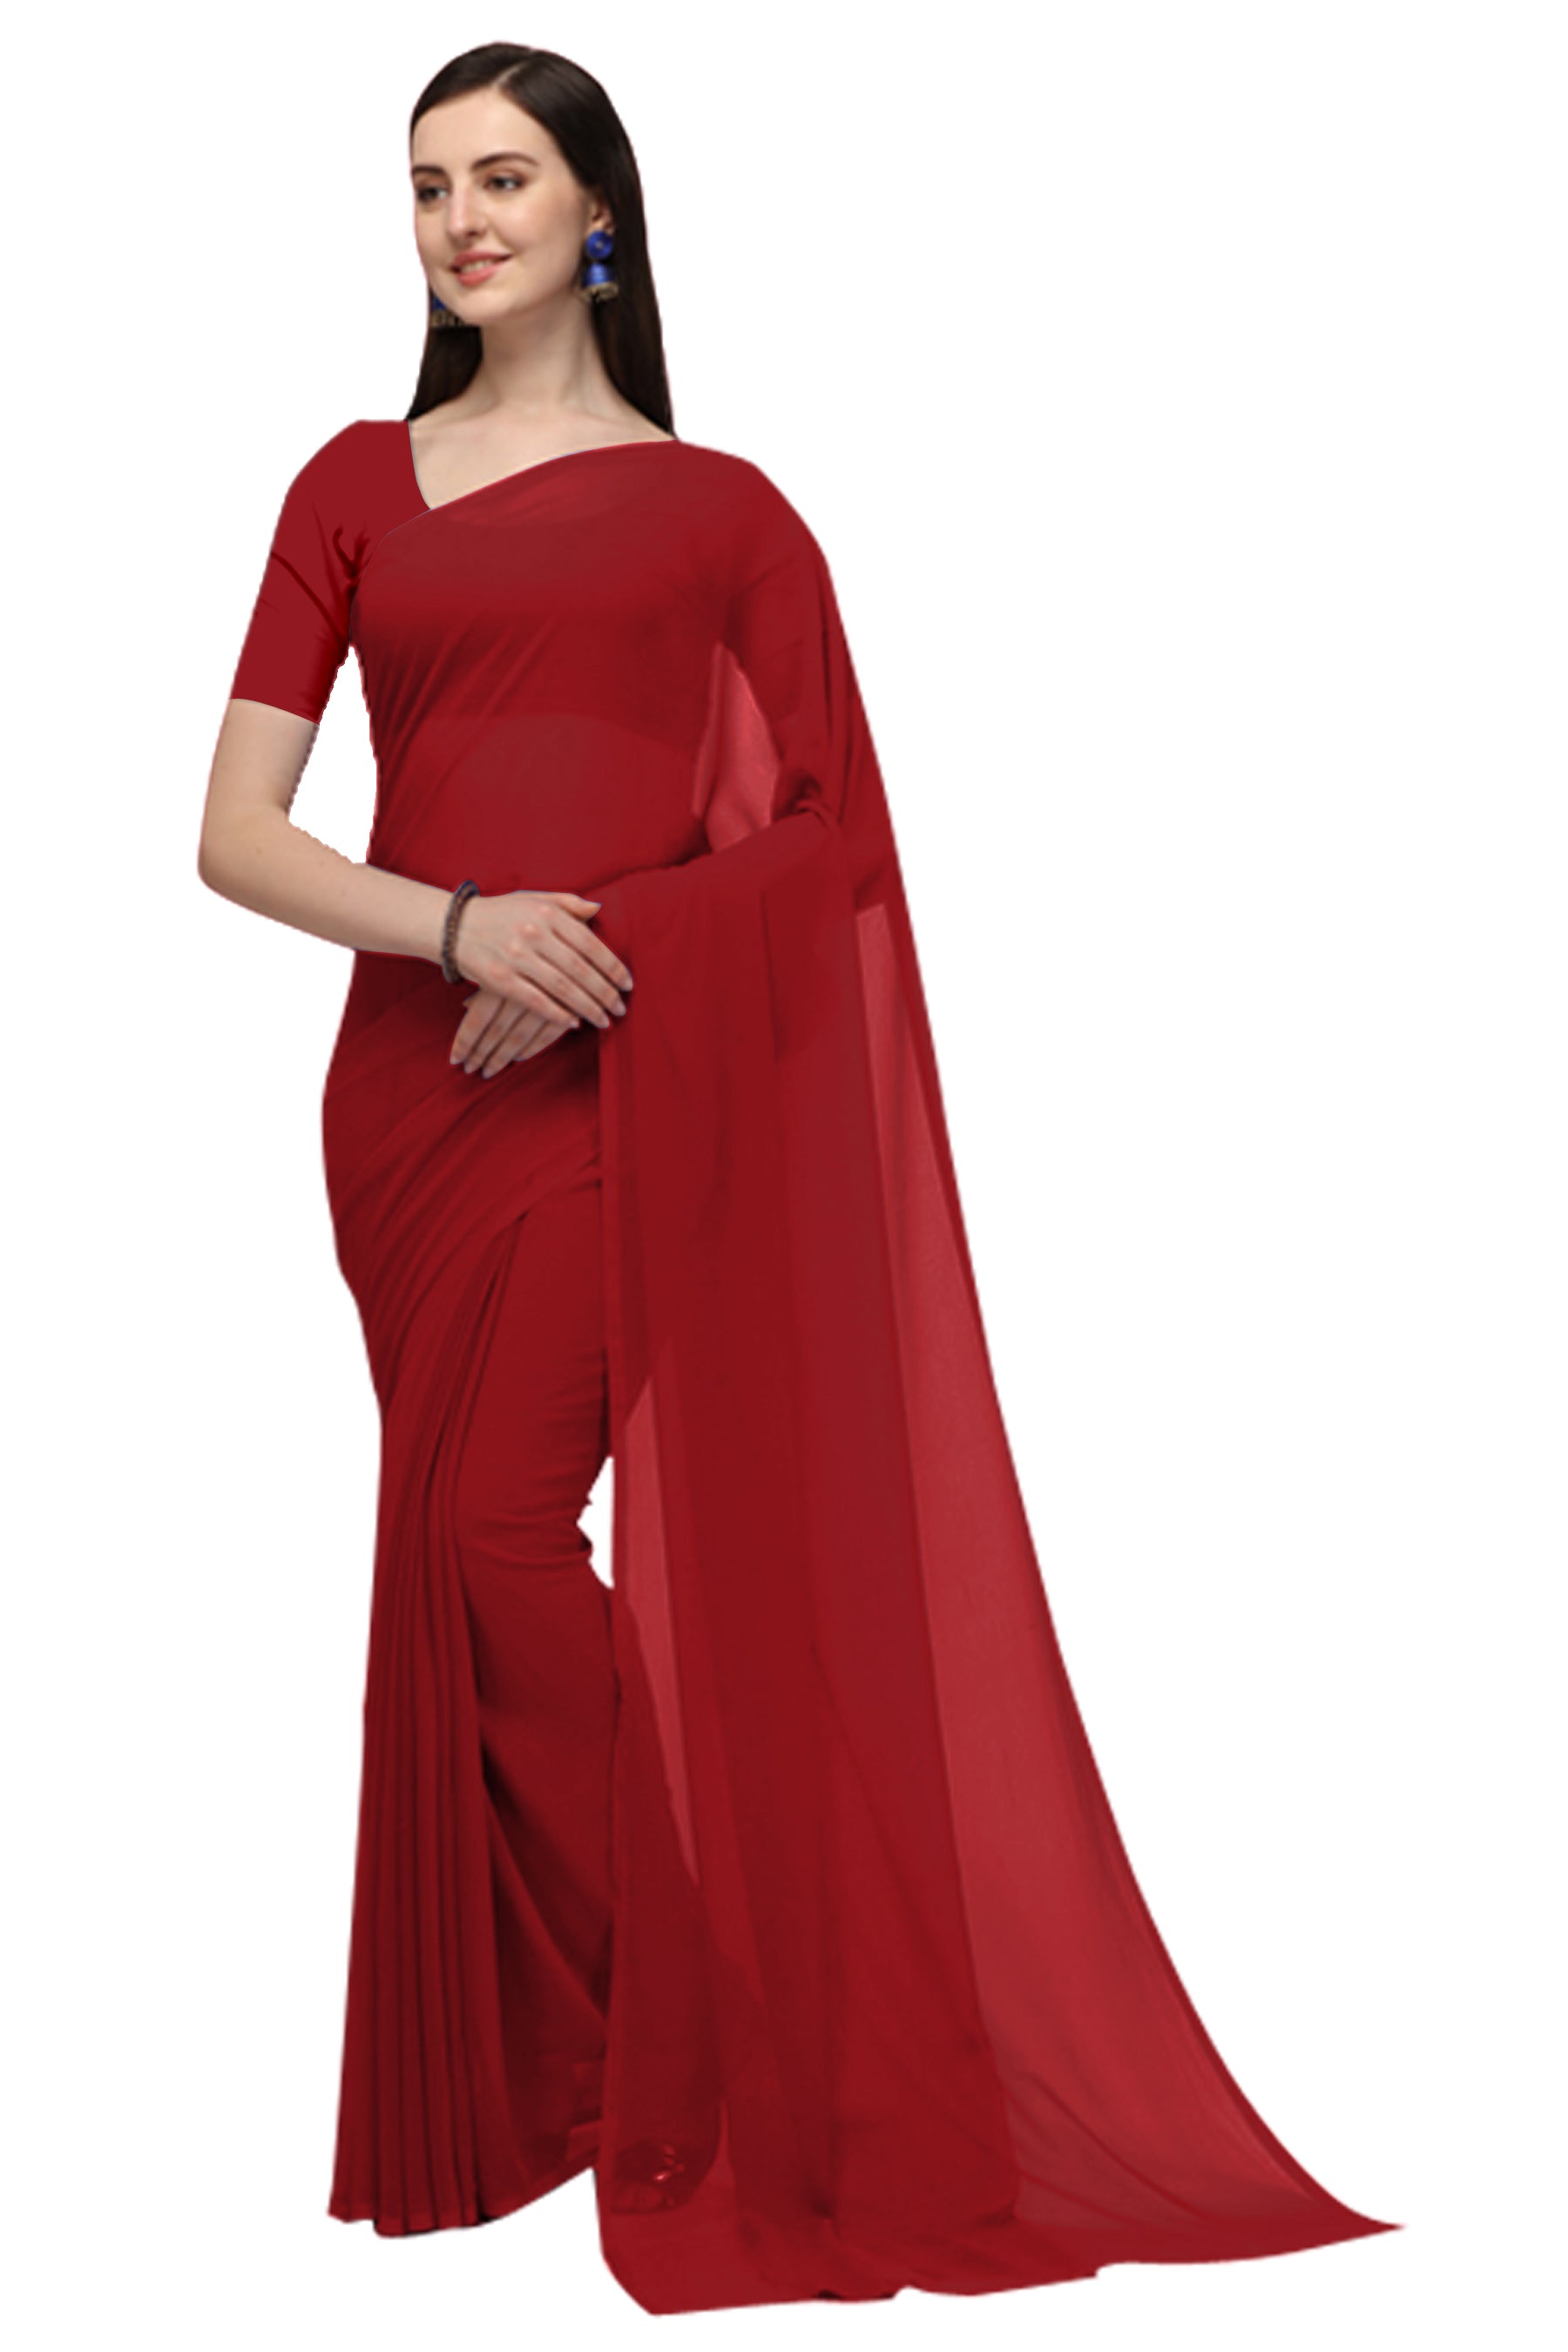 Women's Plain Woven Daily Wear  Formal Georgette Sari With Blouse Piece (Maroon) - NIMIDHYA